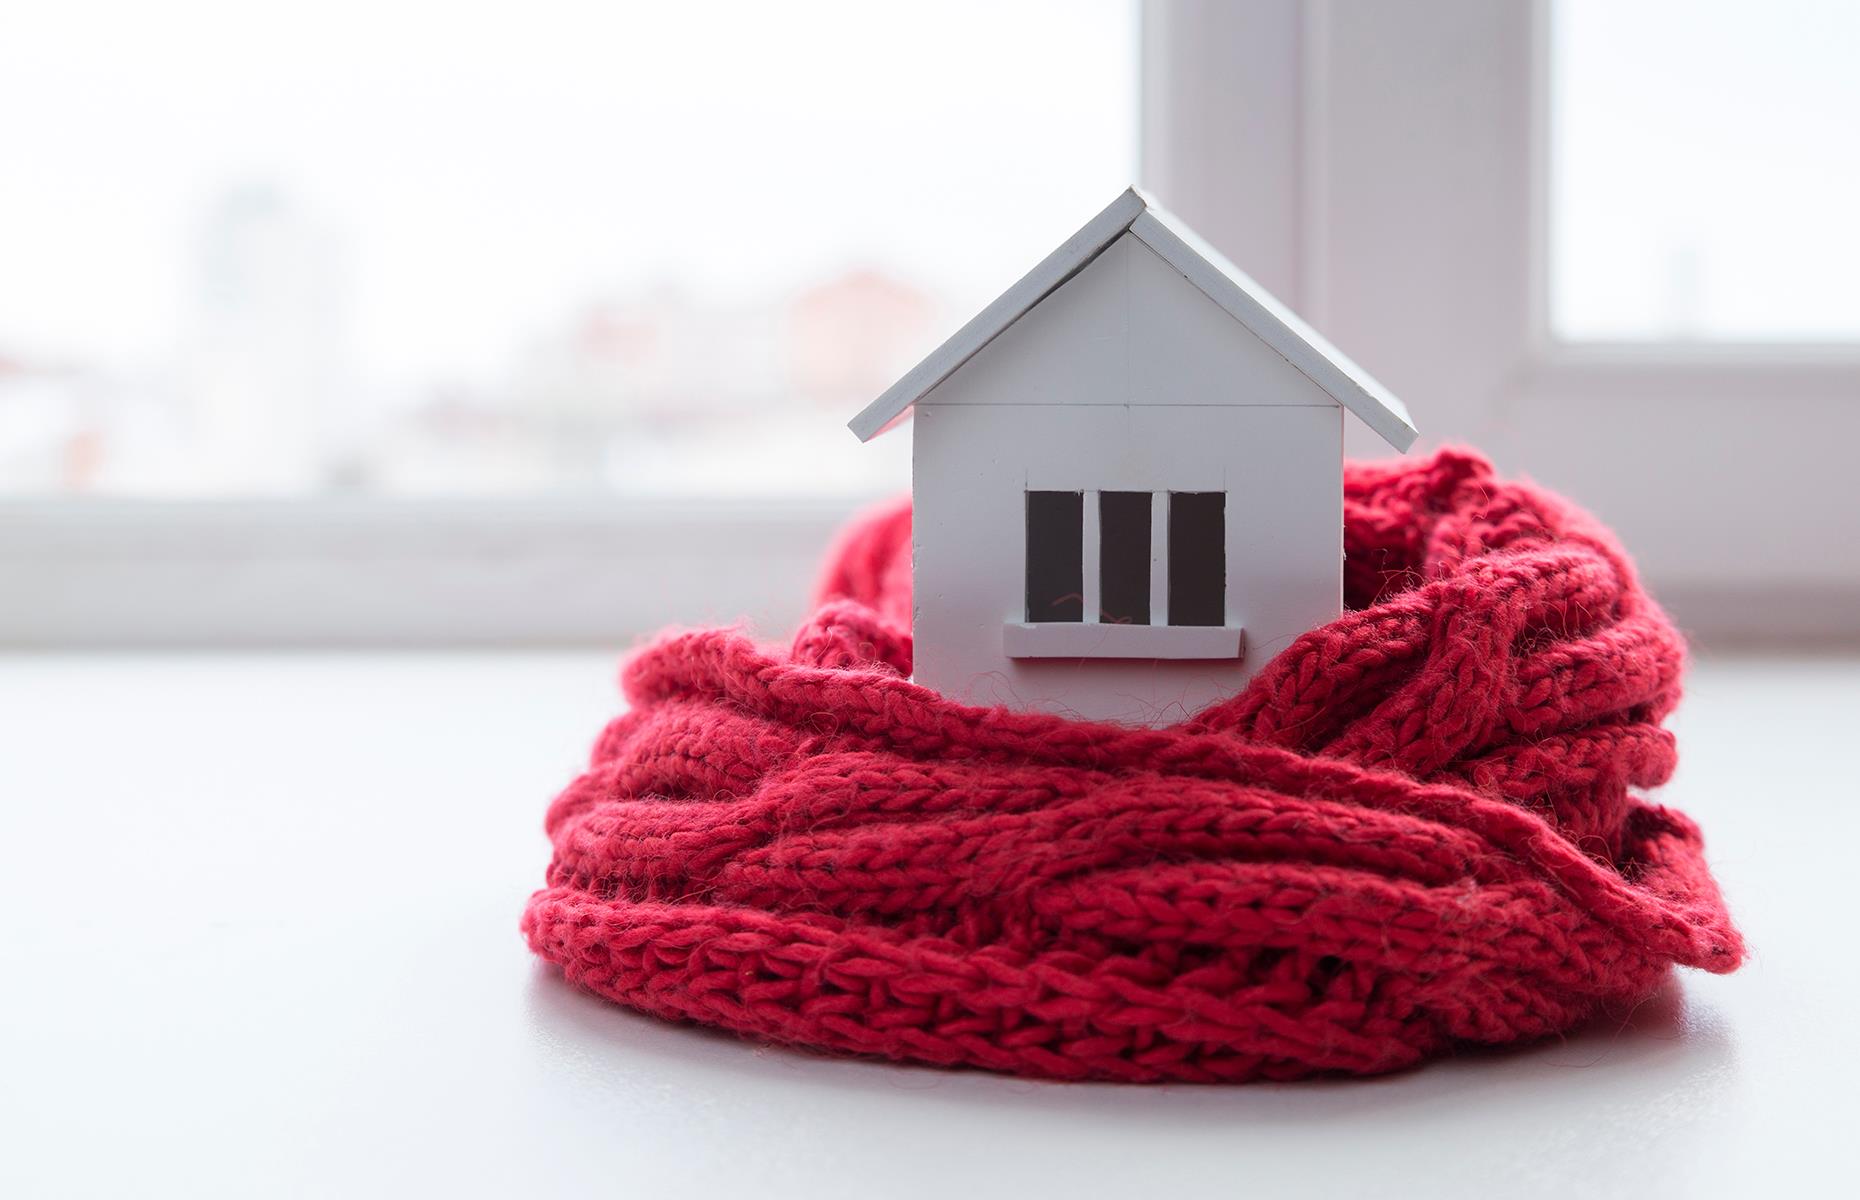 <p>It sounds boring but when it comes to comfort and heating efficiency, there's nothing like a truly well-insulated home. Insulation can be improved and upgraded as you go and, if you add any extensions, make sure you go for high-quality materials. It'll pay for itself in bills over the next few years.</p>